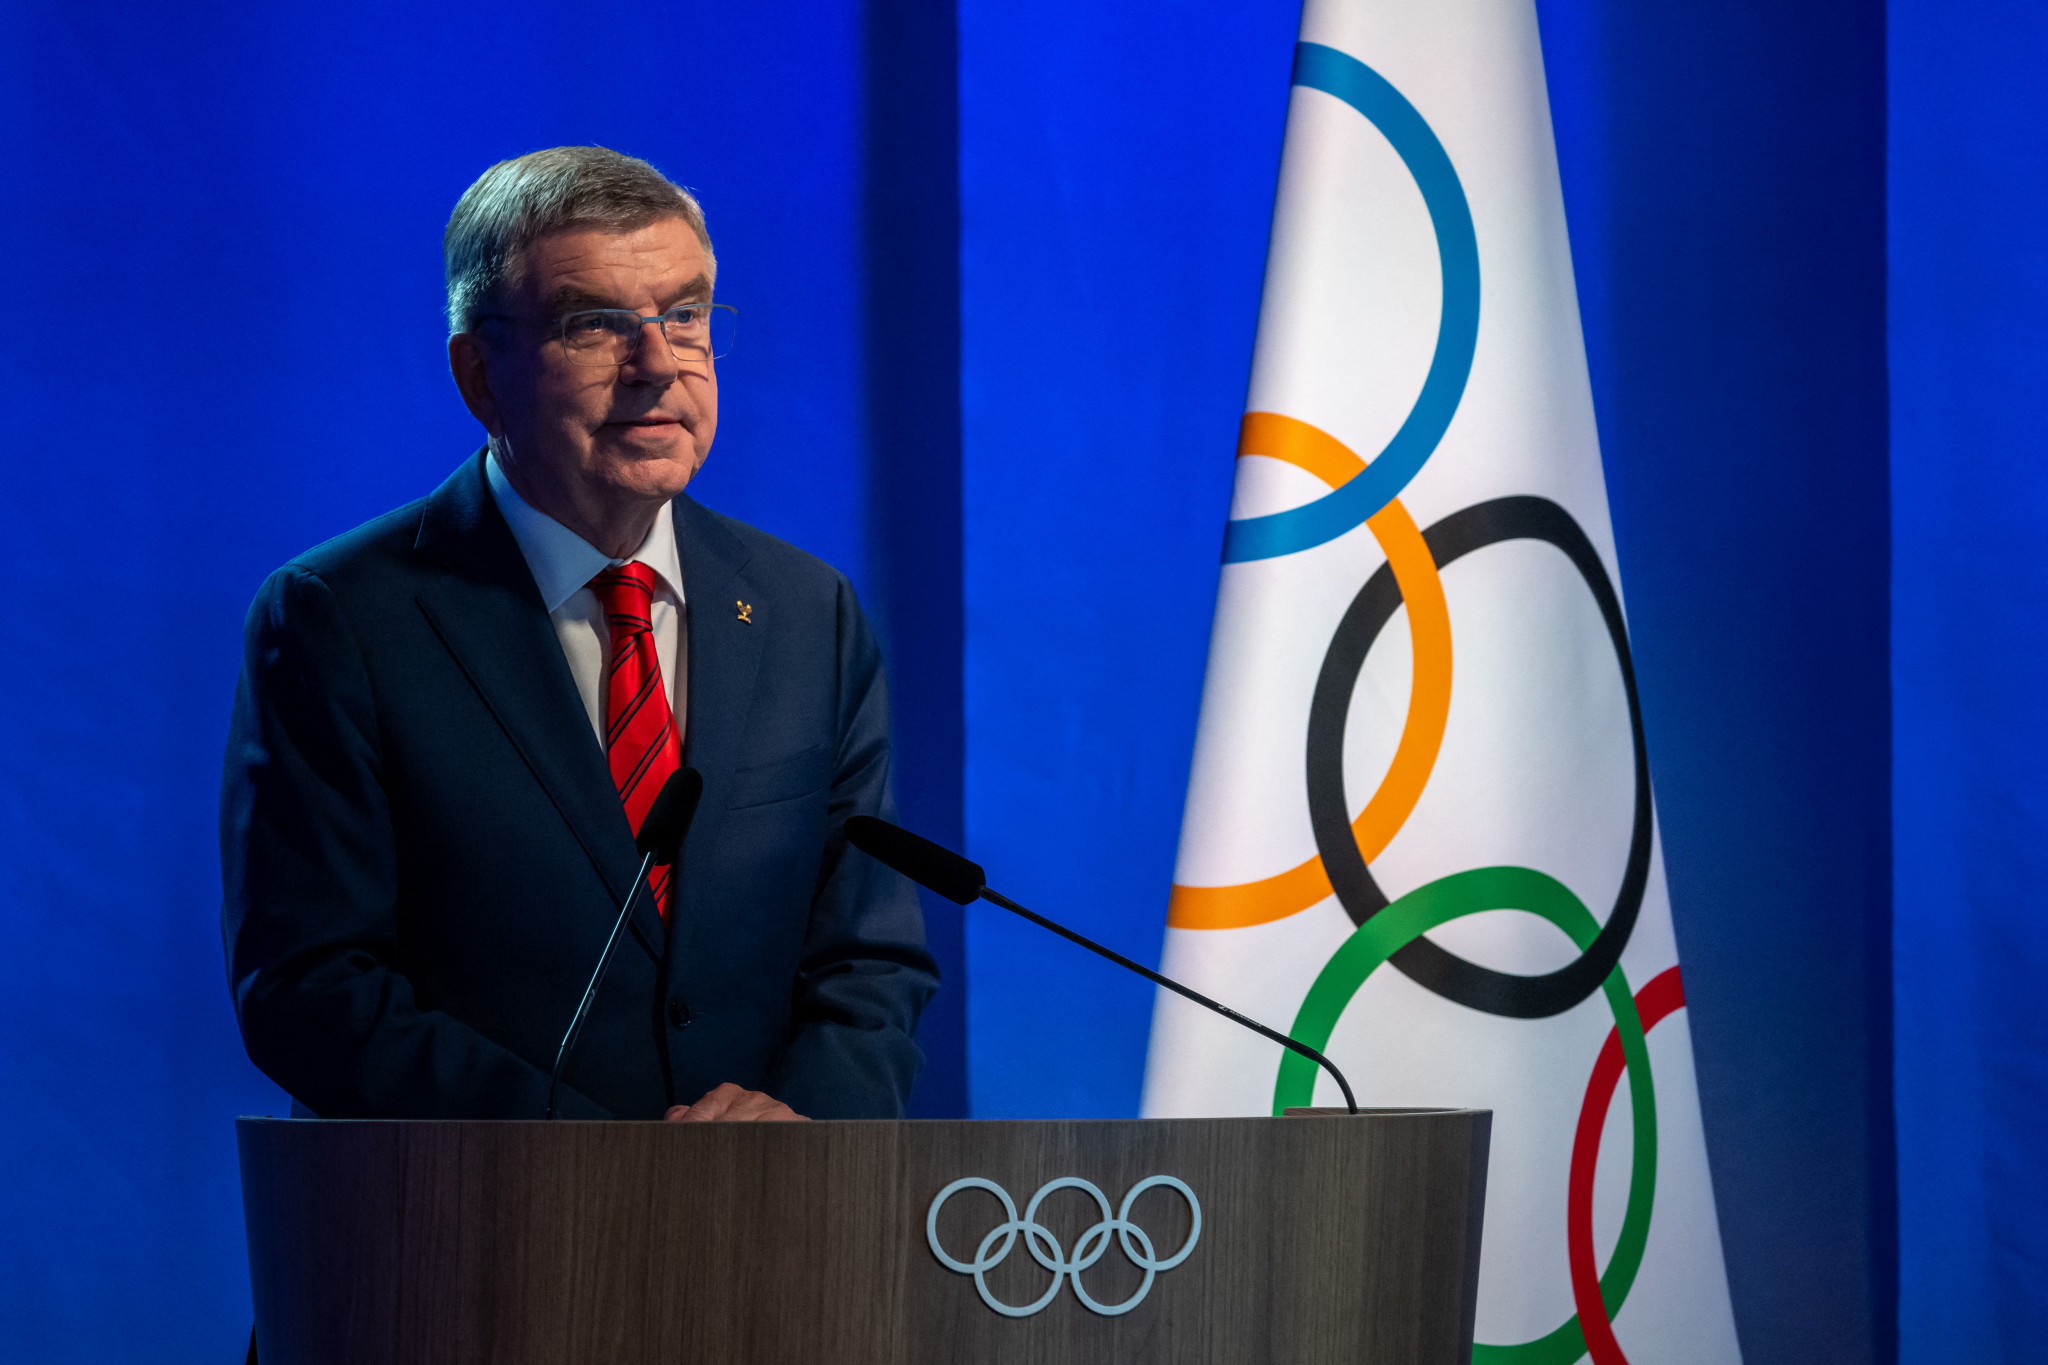 IOC chief Thomas Bach recently said there is a "strong case" for India to host the 2036 Olympics ©Getty Images